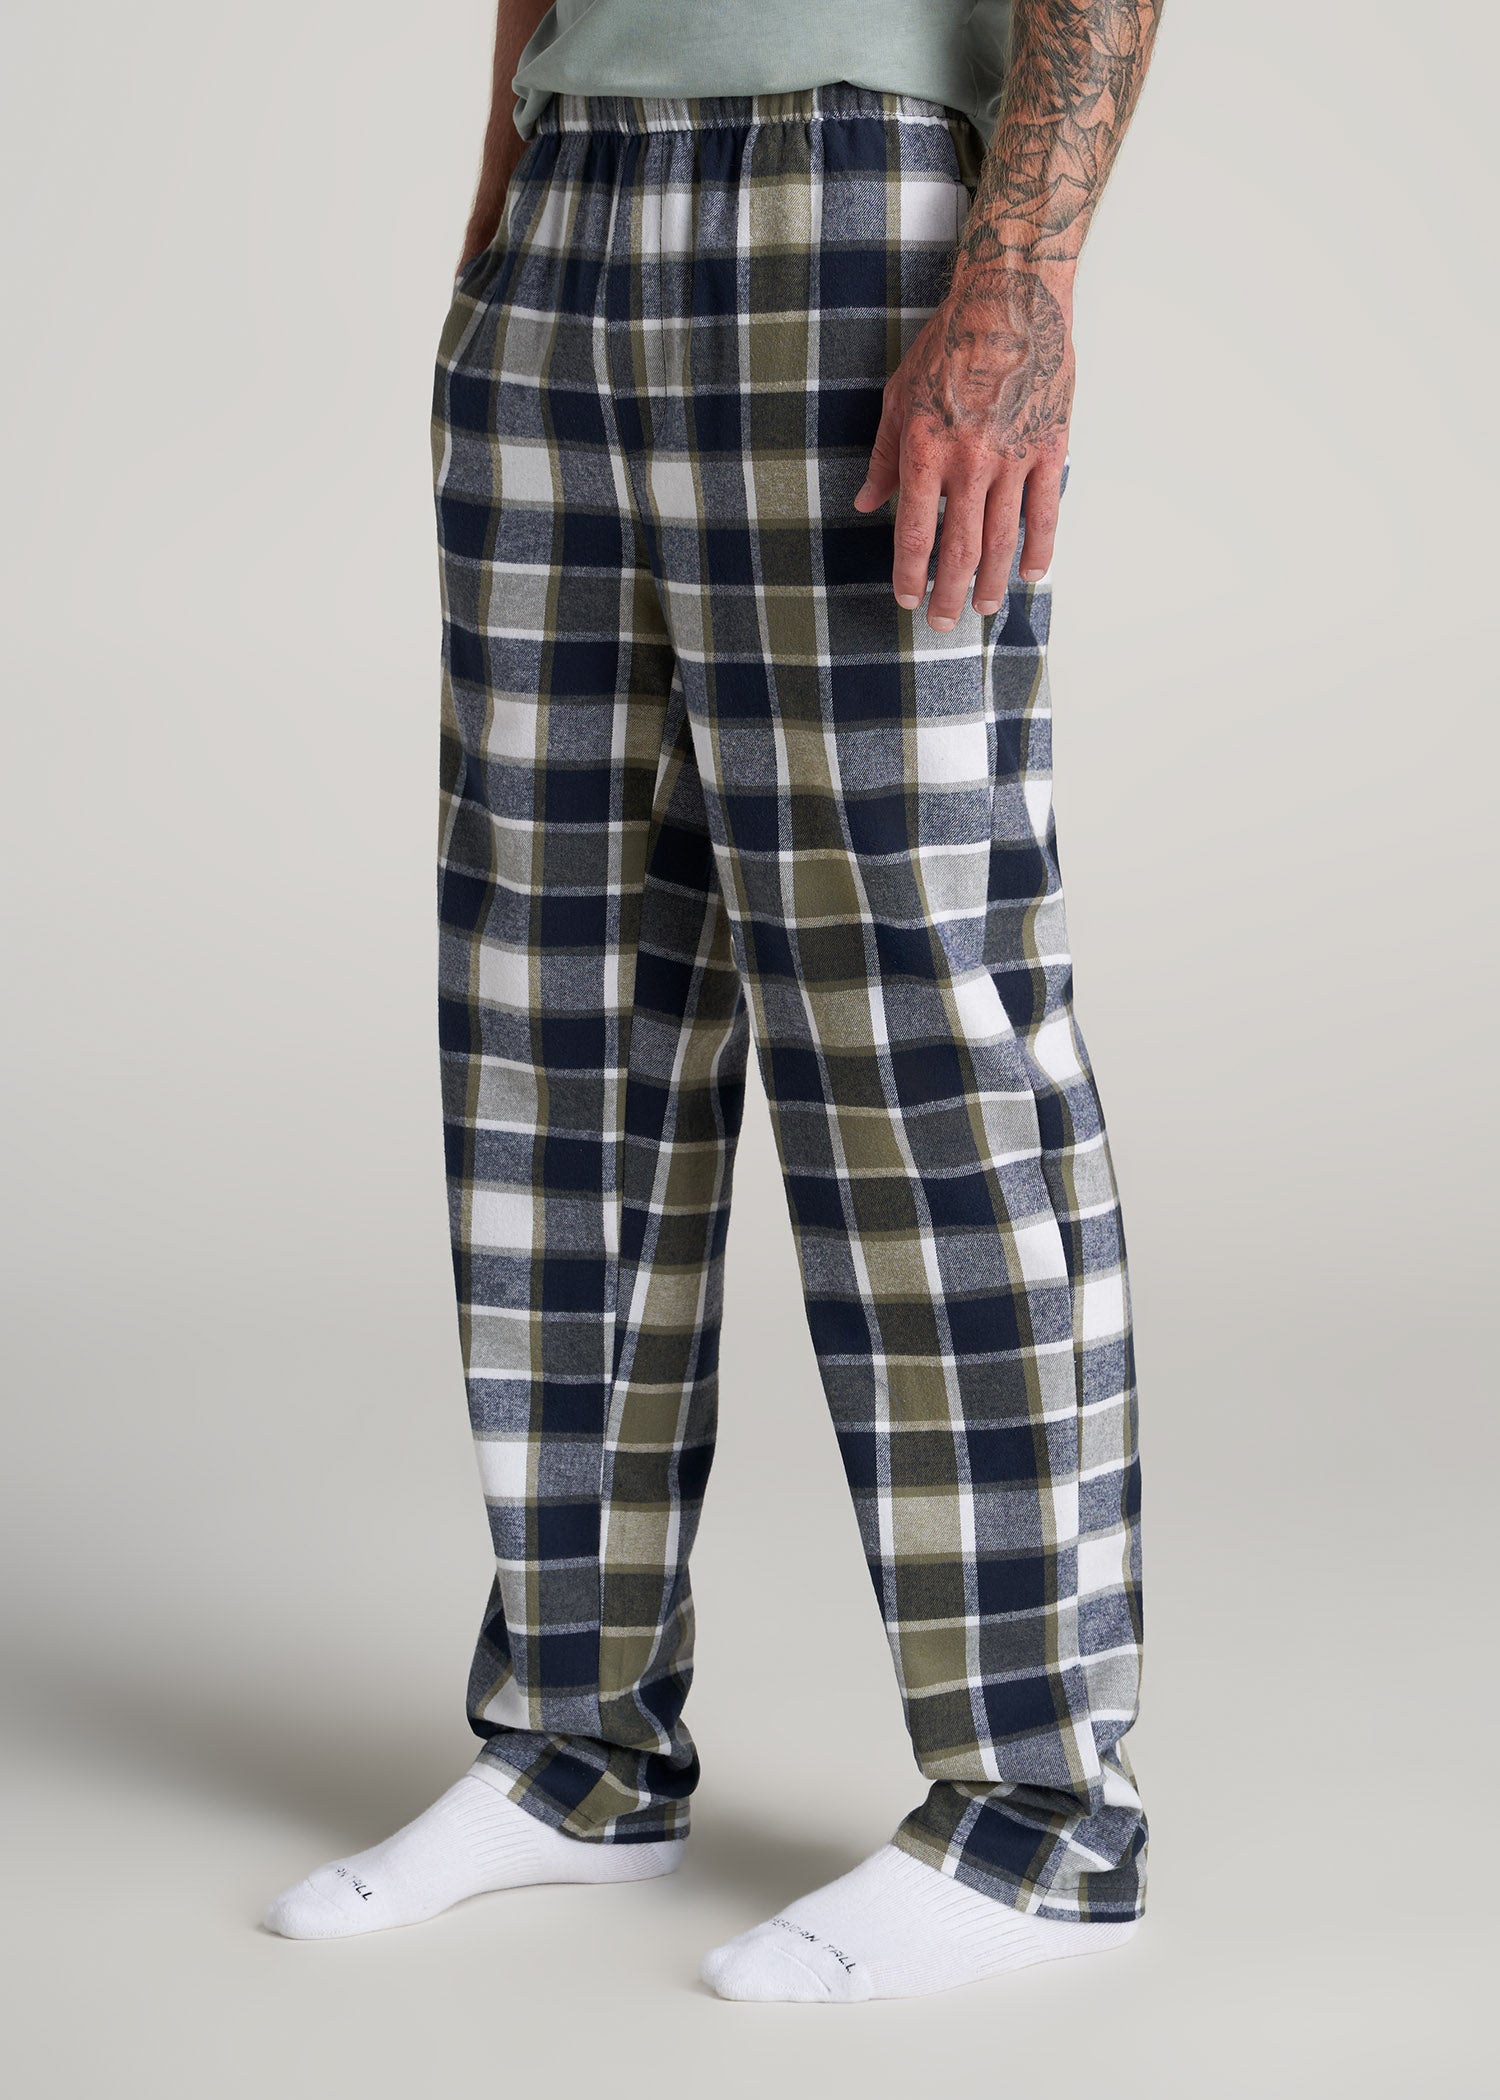        American-Tall-Men-Flannel-Pajamas-Olive-Navy-Grid-side